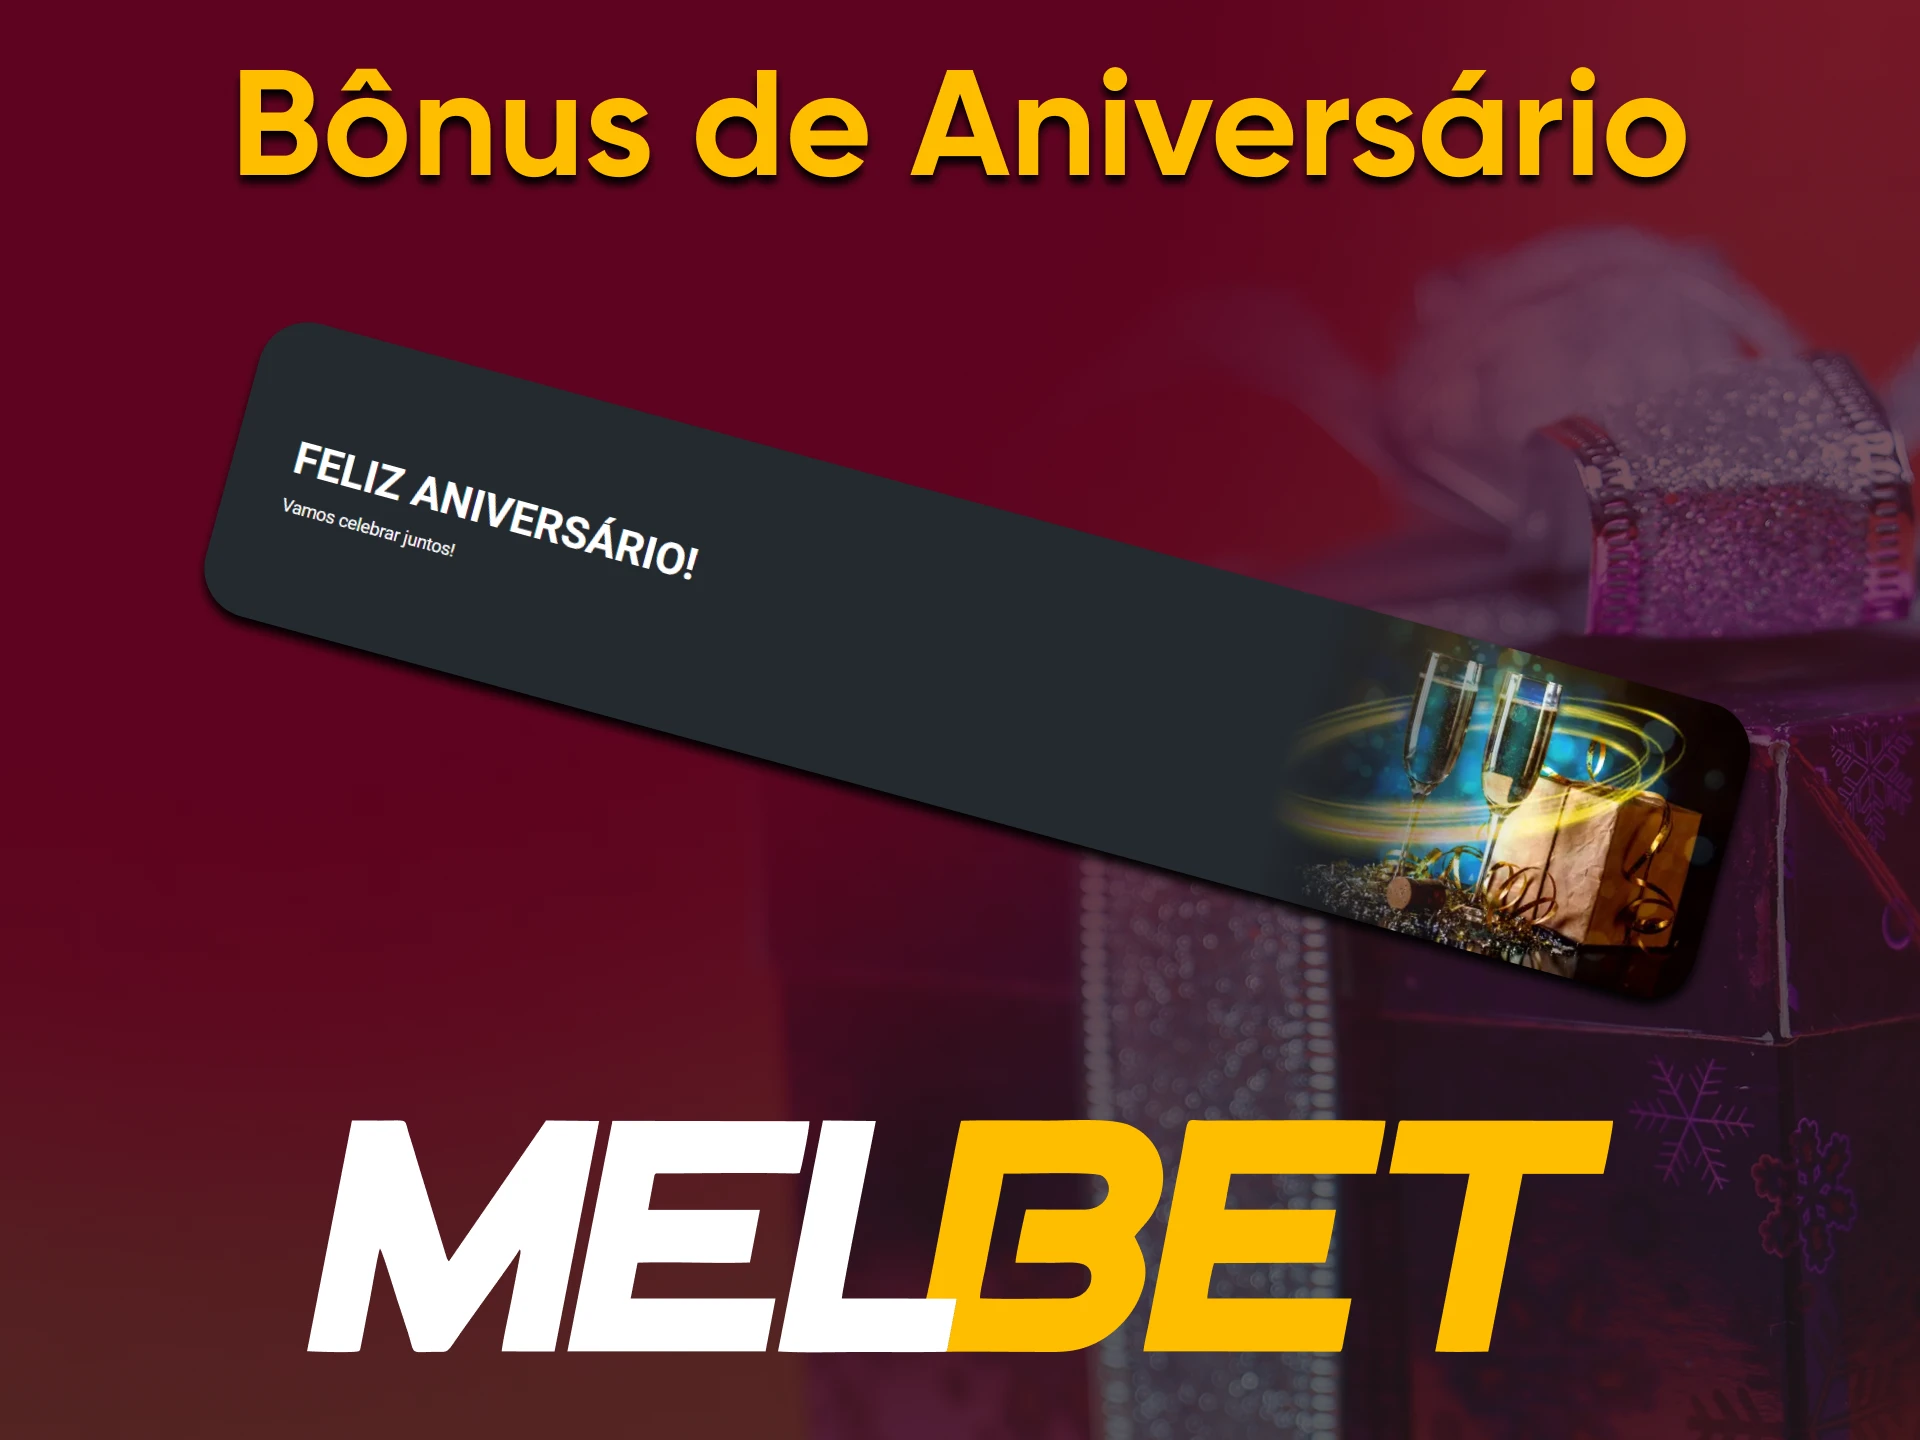 On the Melbet website, you can get an annual bonus.